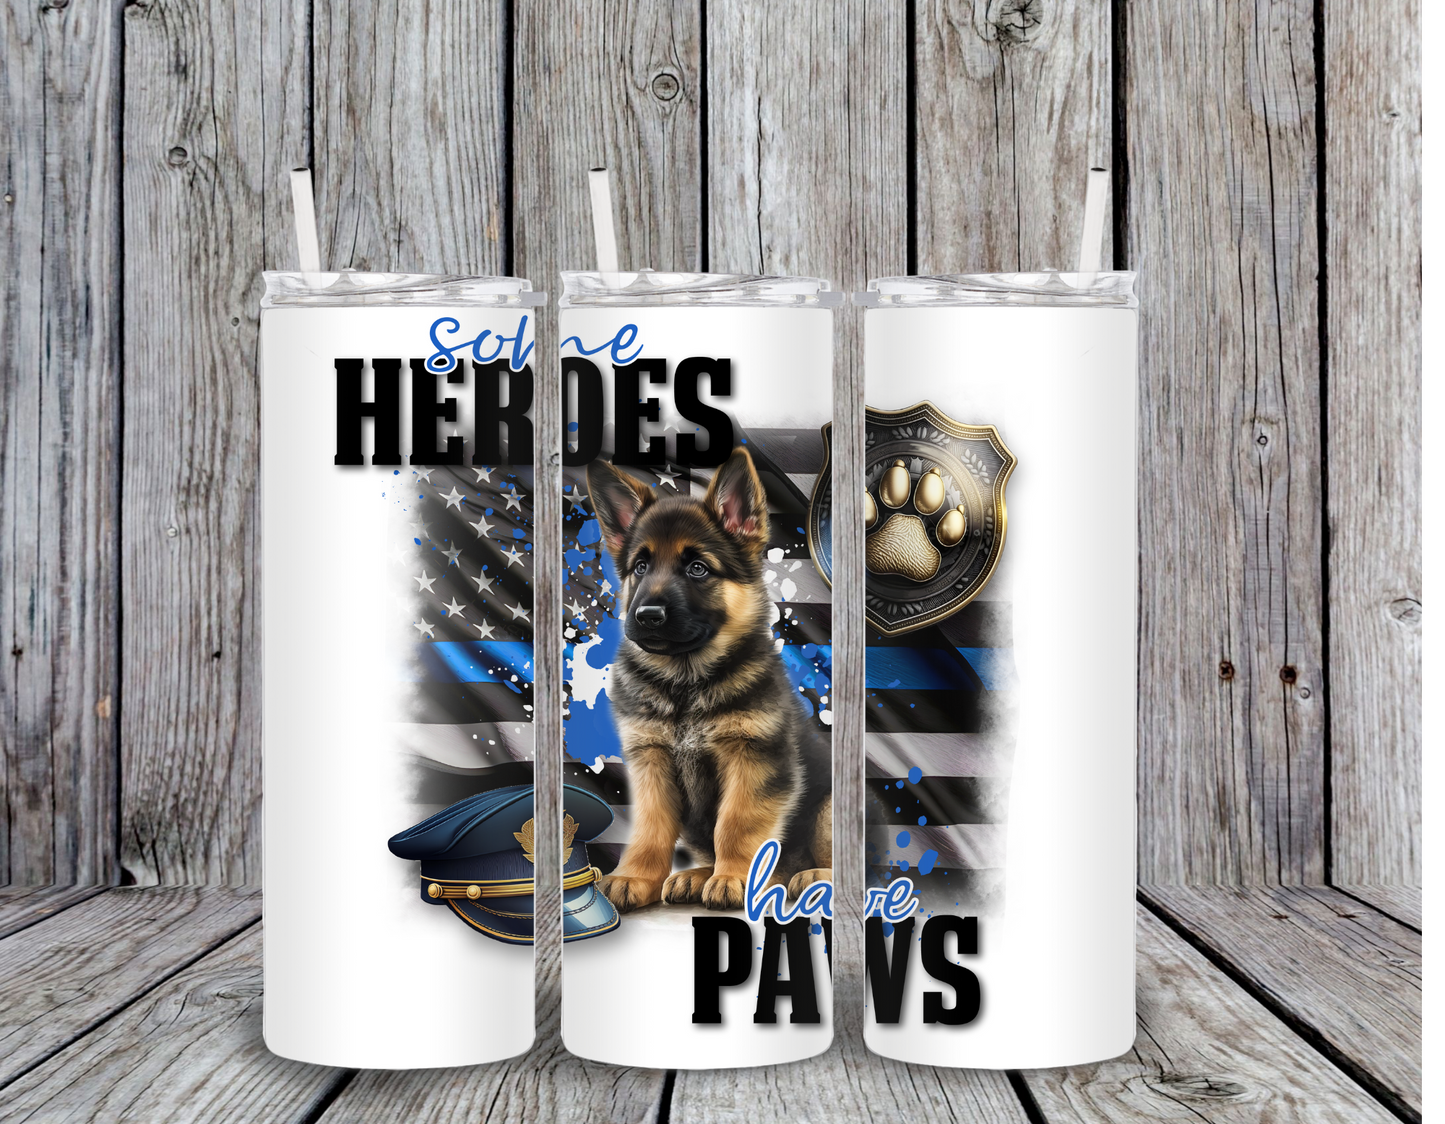 Some Heroes Have Paws 20 oz Tumbler